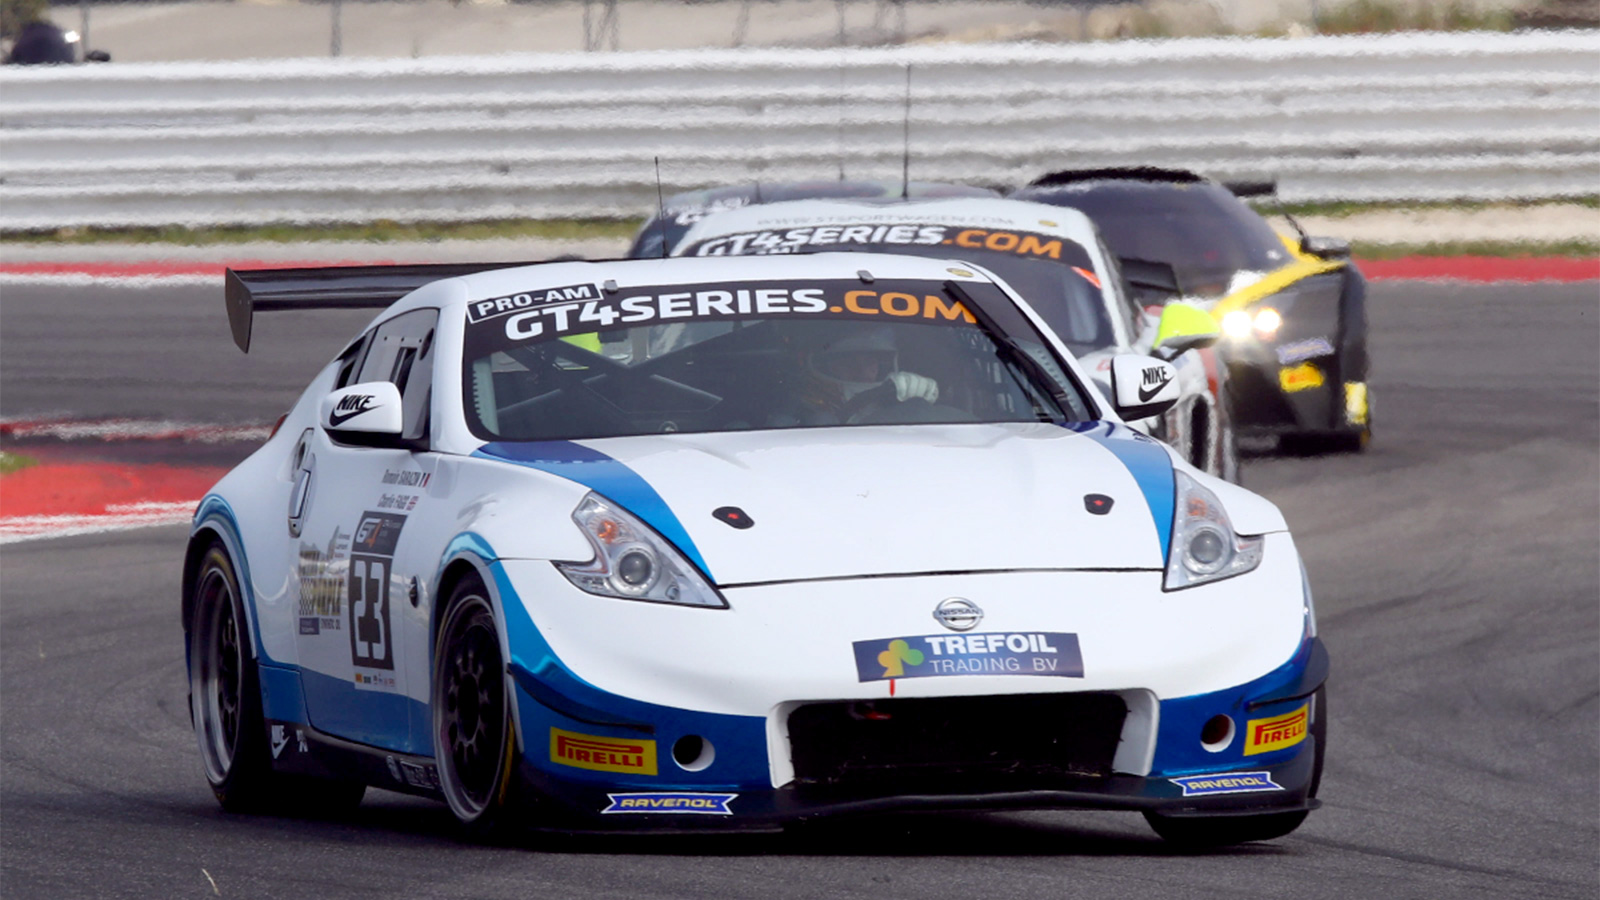 Great endurance racing debut for SWR at Misano in GT4 European Series.